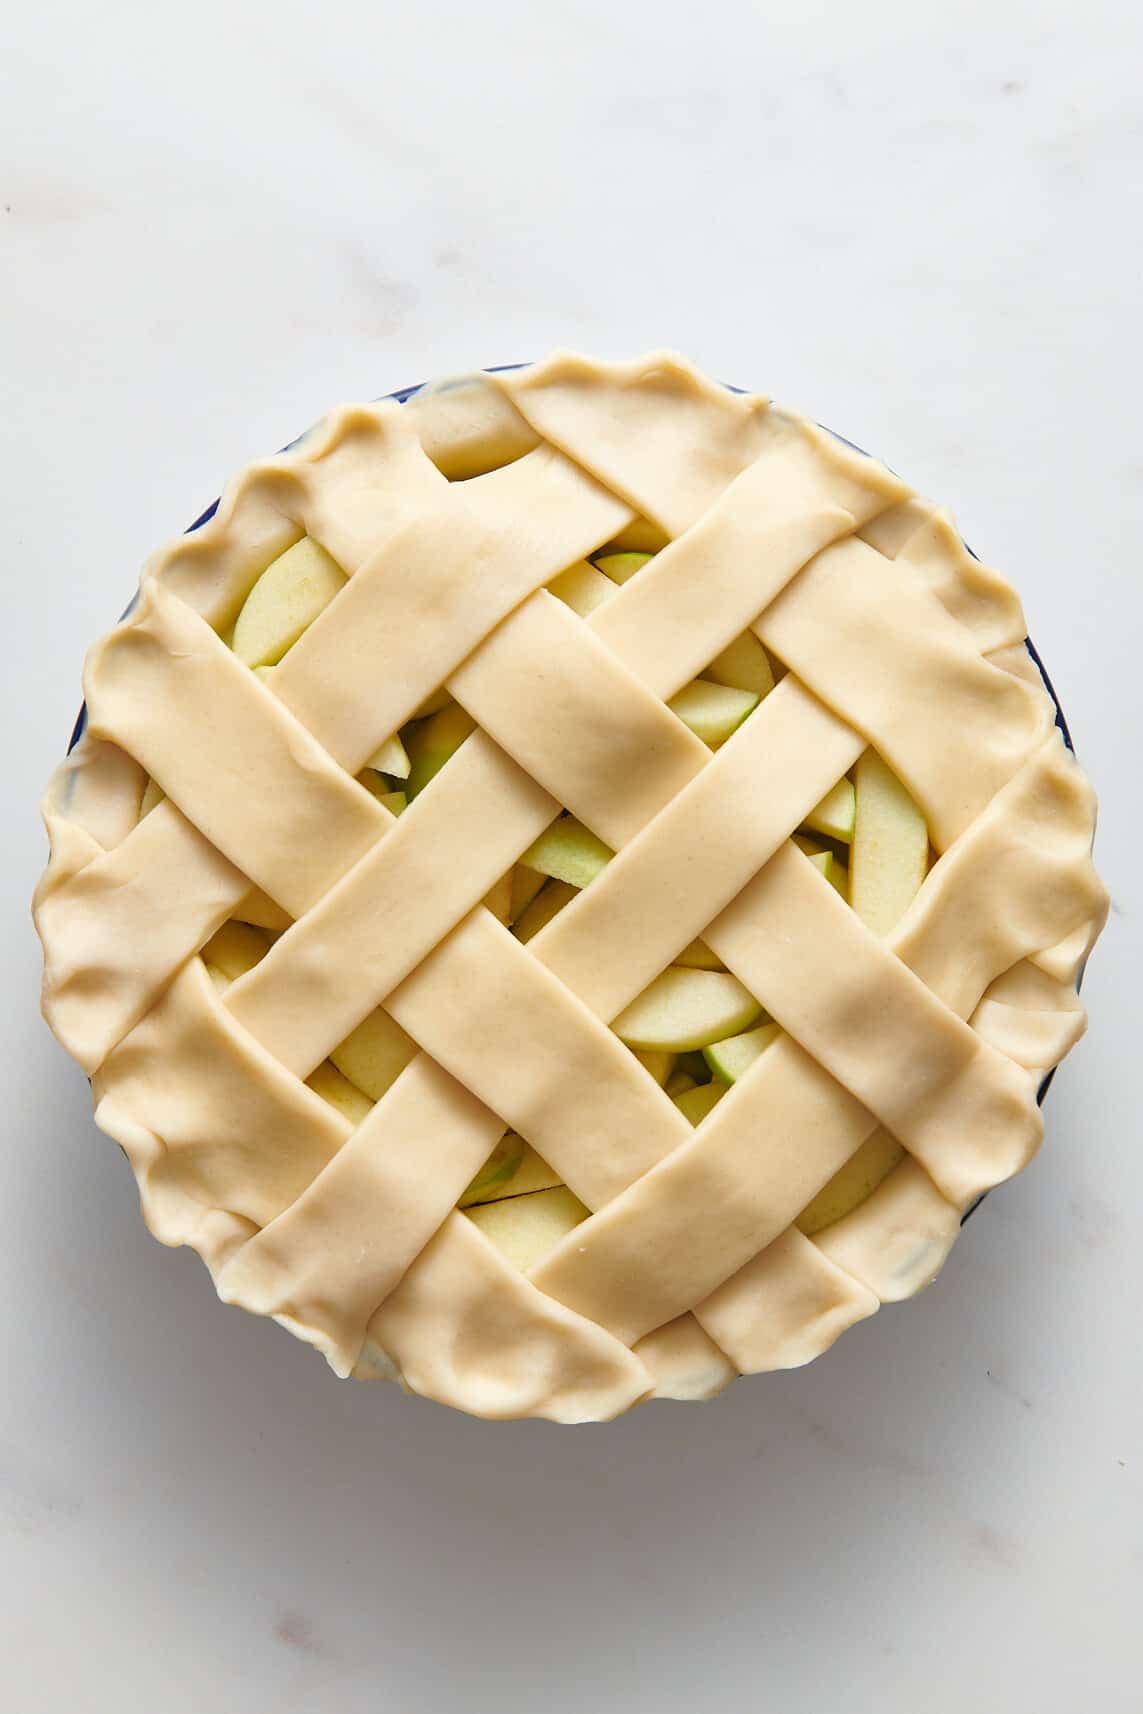 pie crust lined pan with sliced granny smith apples topped with a lattice pattern made of pie crust.